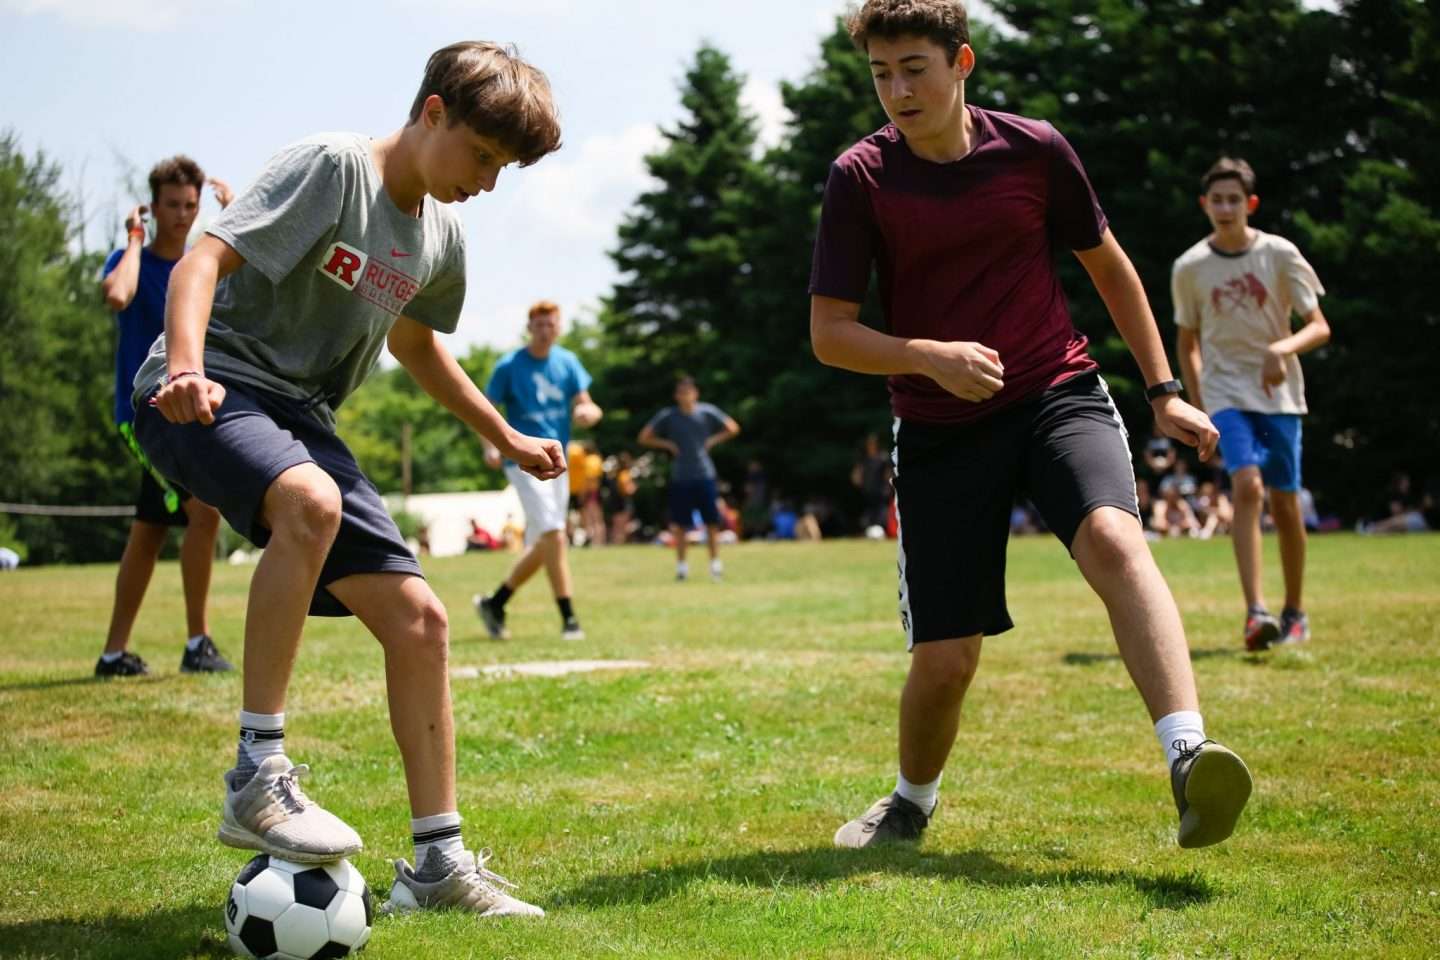 Group of campers playing soccer on the playing fields